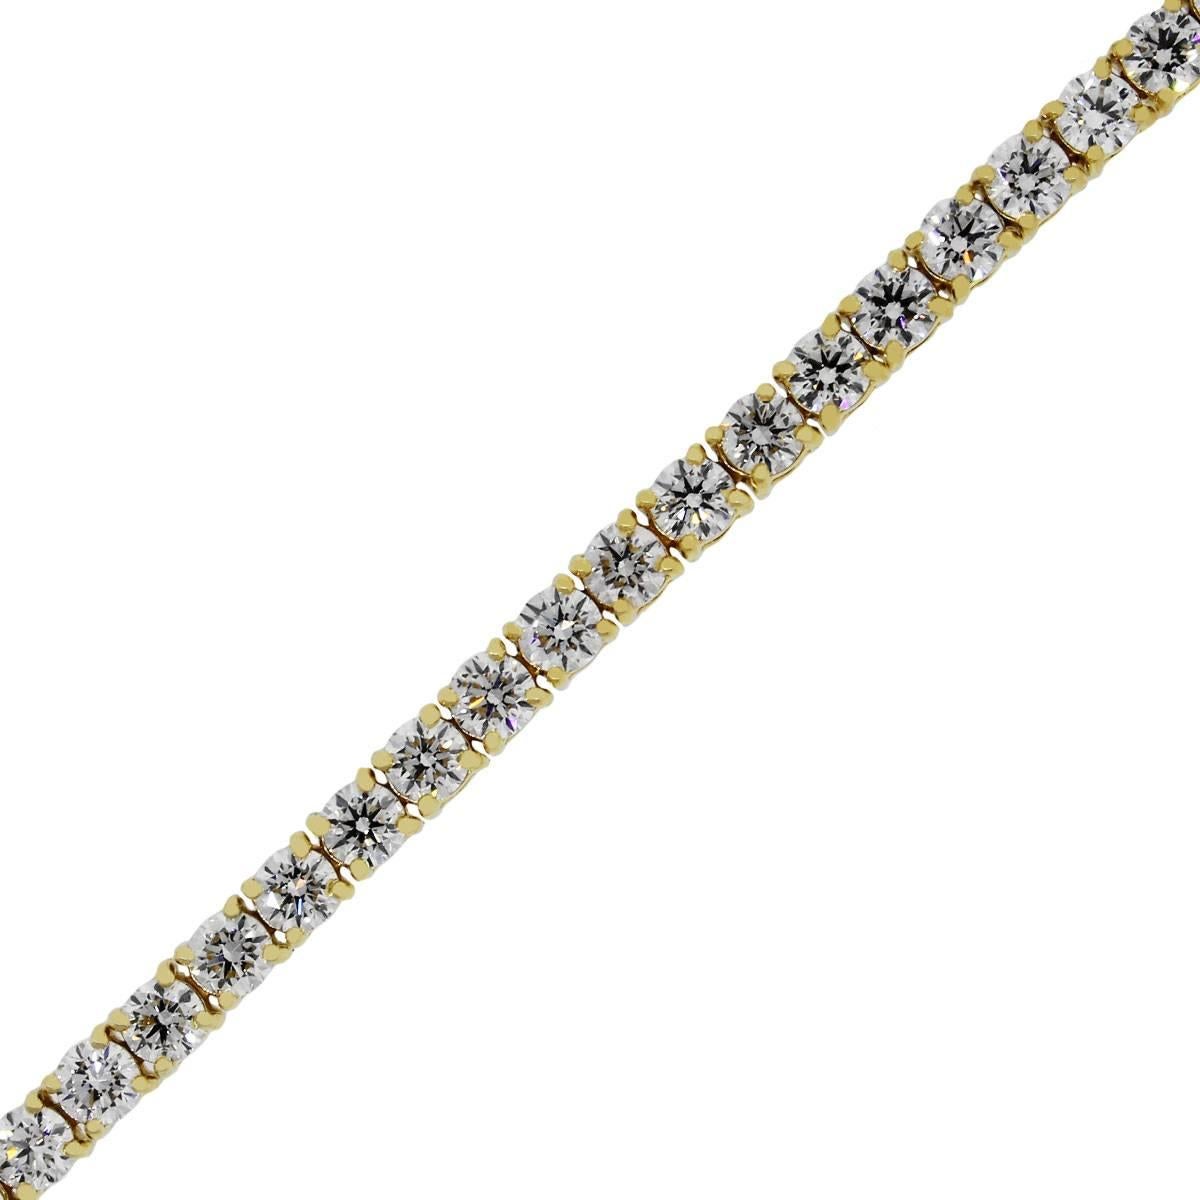 Material: 14k yellow gold
Diamond Details: Approximately 6.36ctw round brilliant diamonds. Diamonds are G/H in color and VS in clarity.
Clasp: Tongue in box clasp with safety latch
Measurements: 7″
Total Weight: 9.4g (6.0dwt)
SKU: A30311460